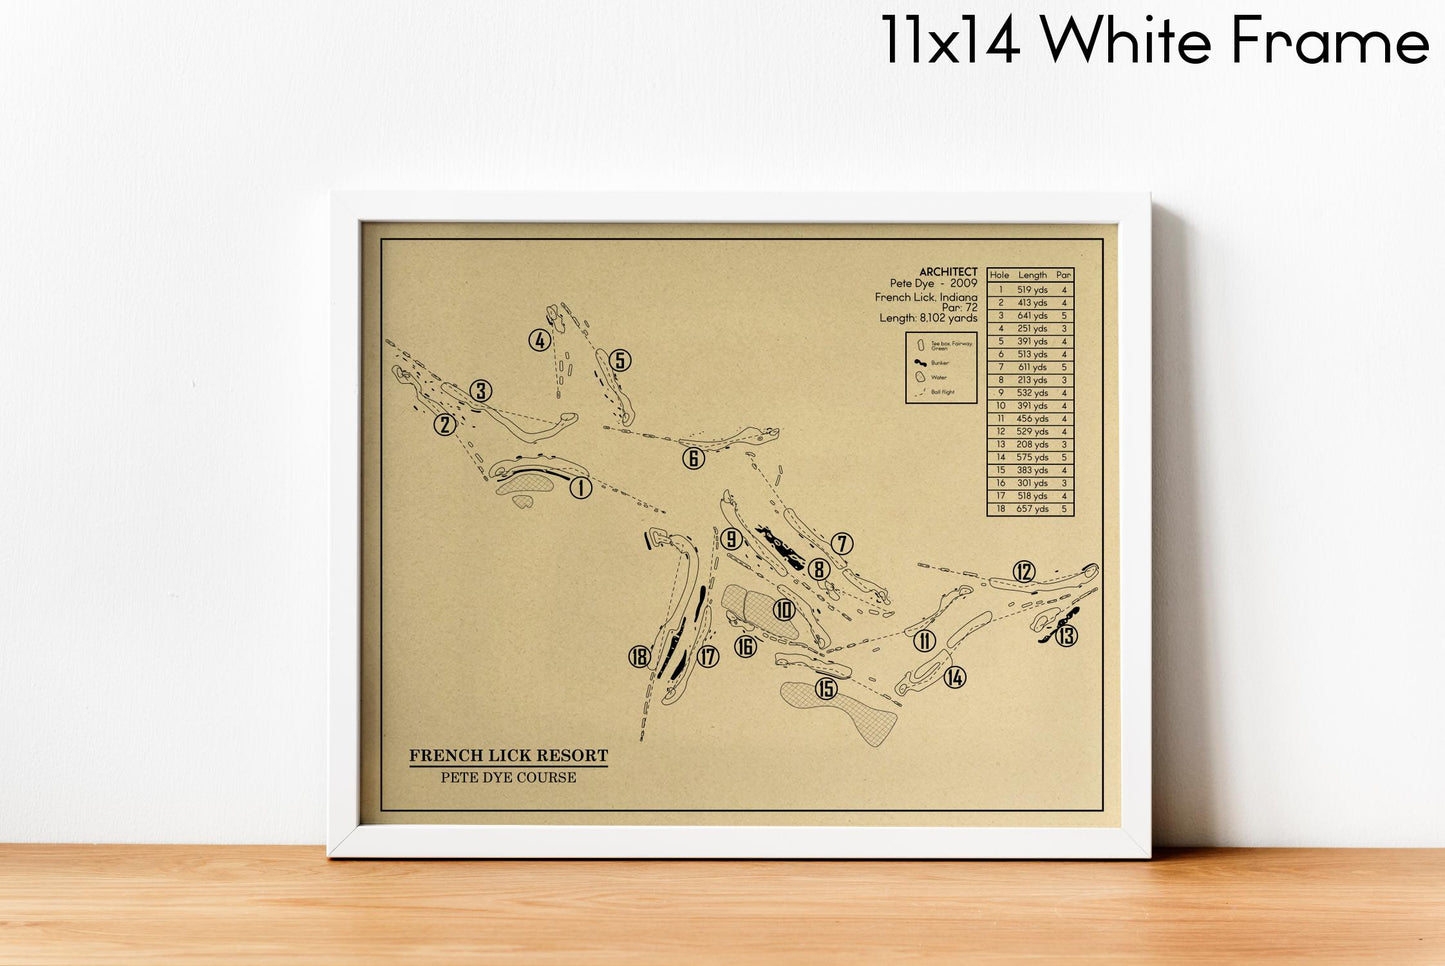 French Lick Resort Pete Dye Course Outline (Print)